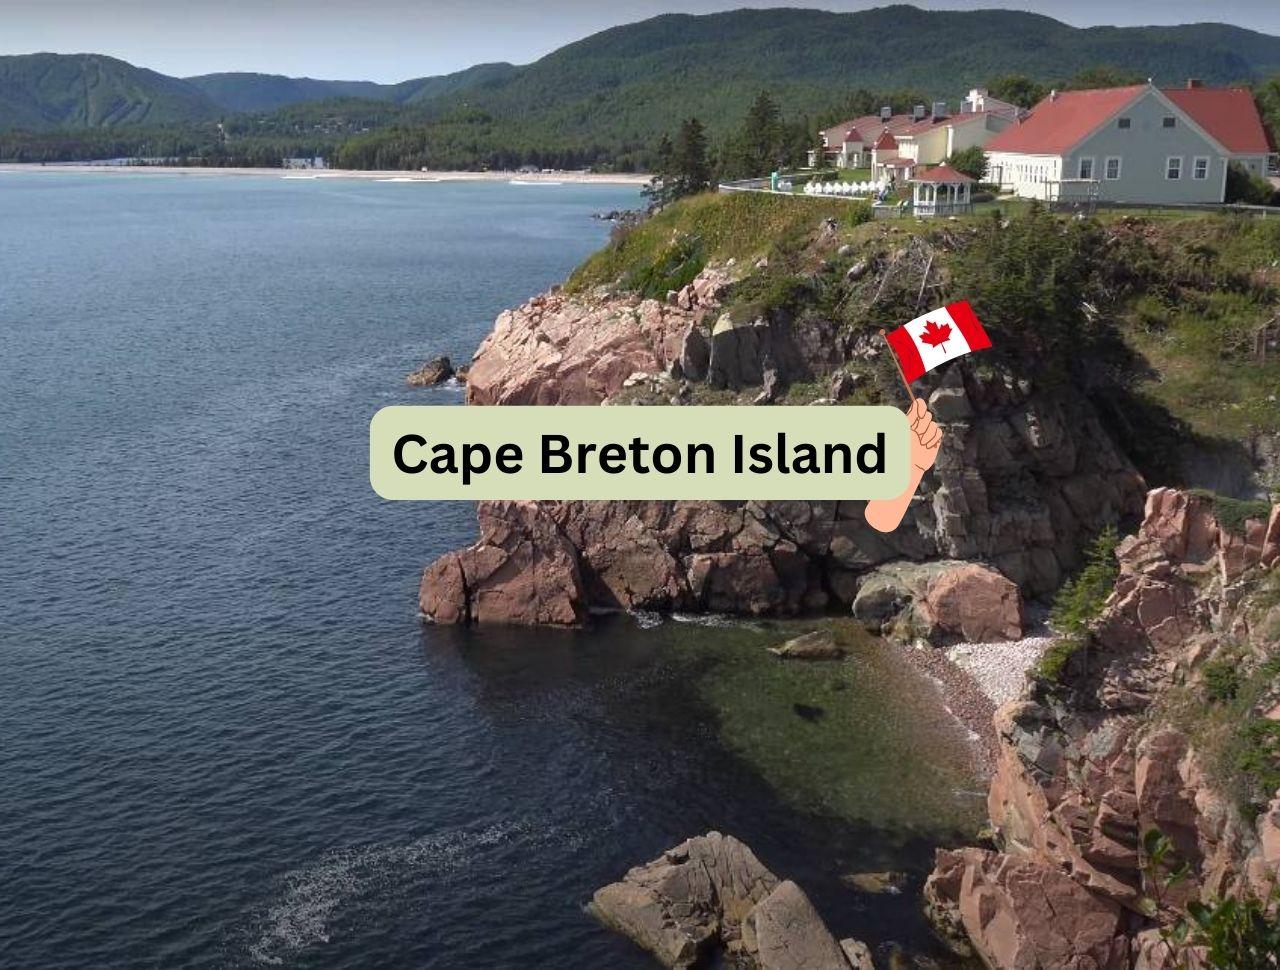 Cape Breton Island: The Best Hiking Trails, Accommodations, and Things to Do and Beyond